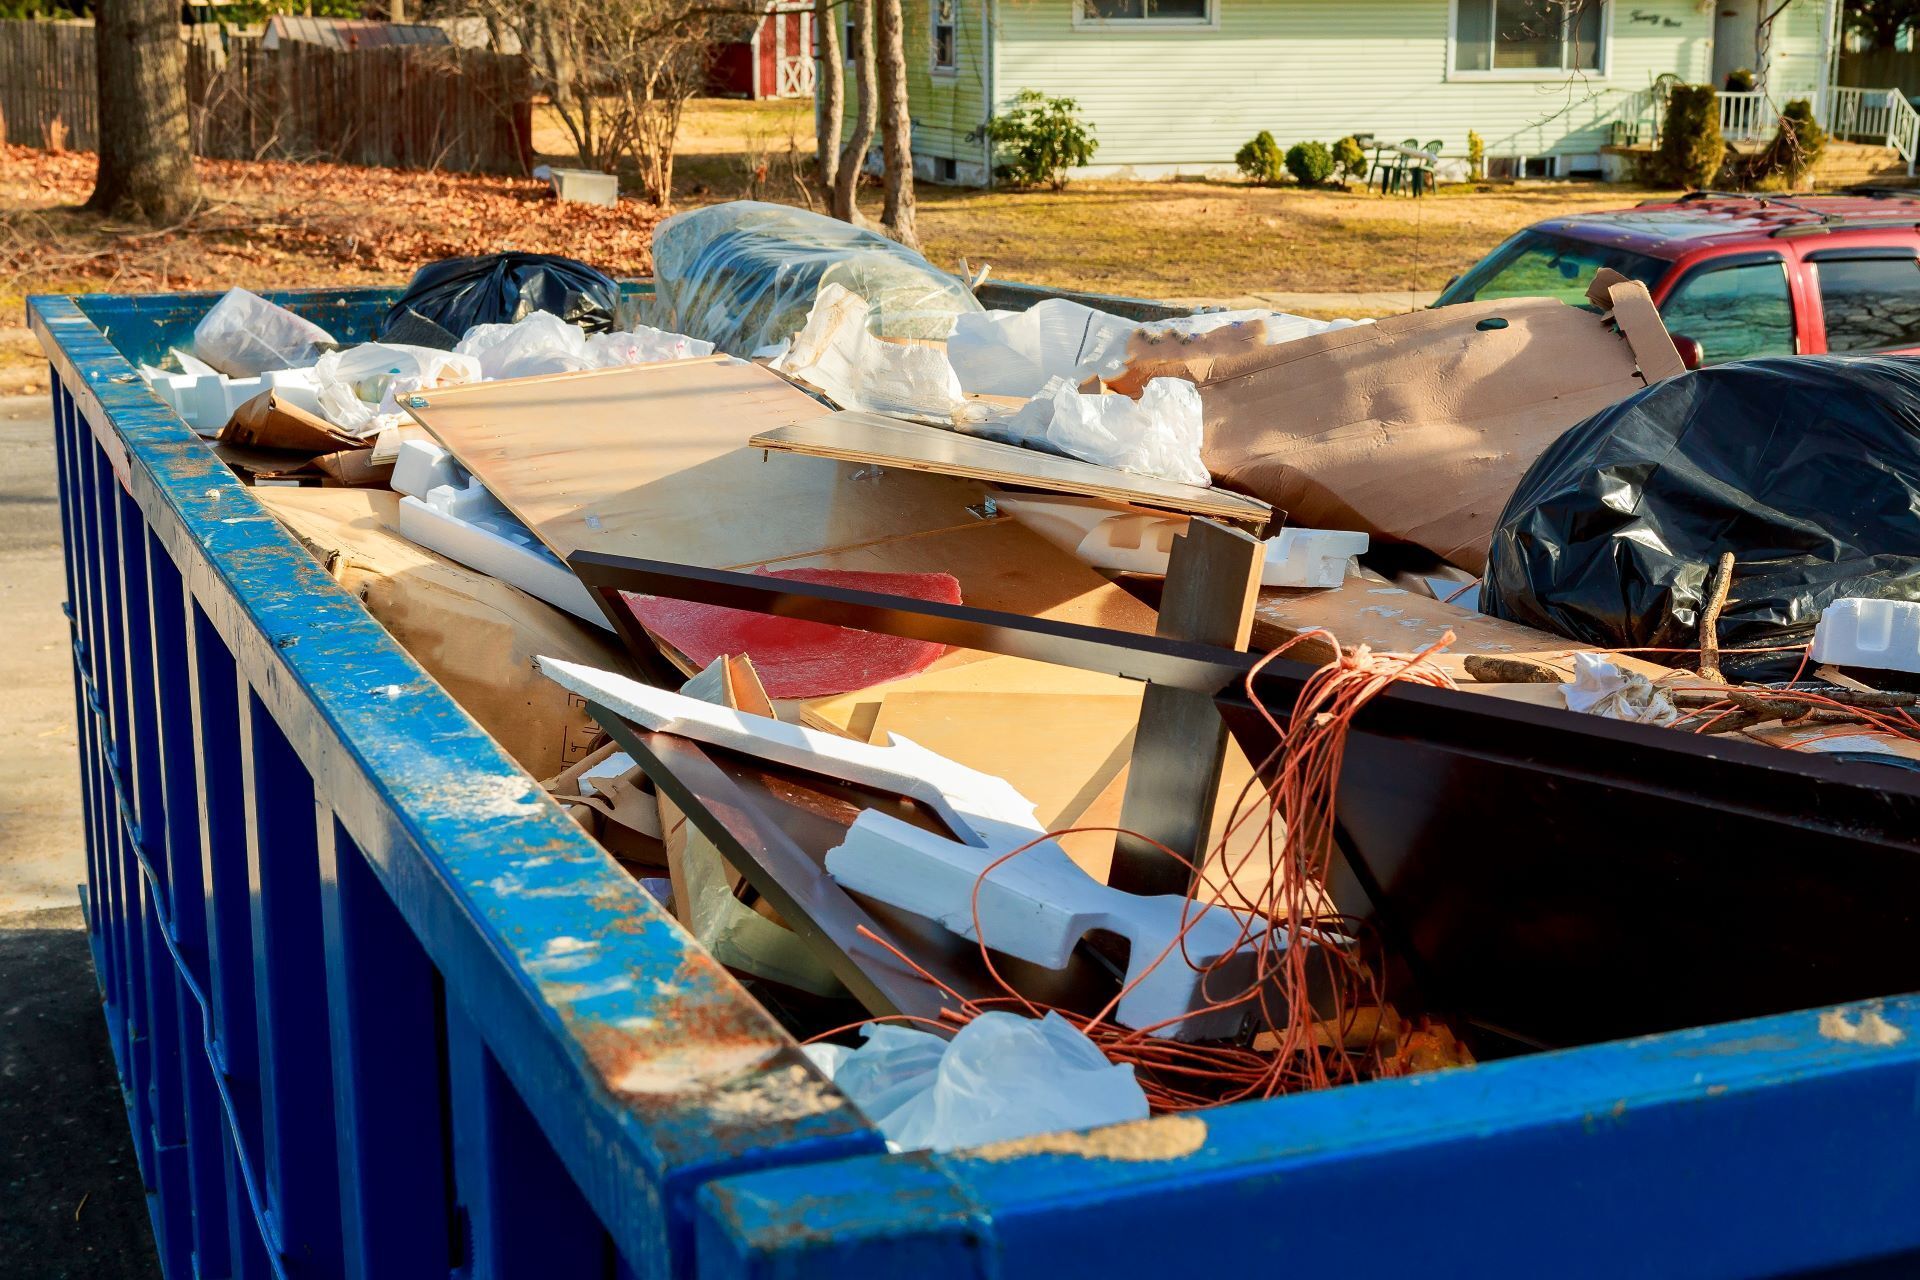 A blue dumpster filled with junk is parked in front of a house.